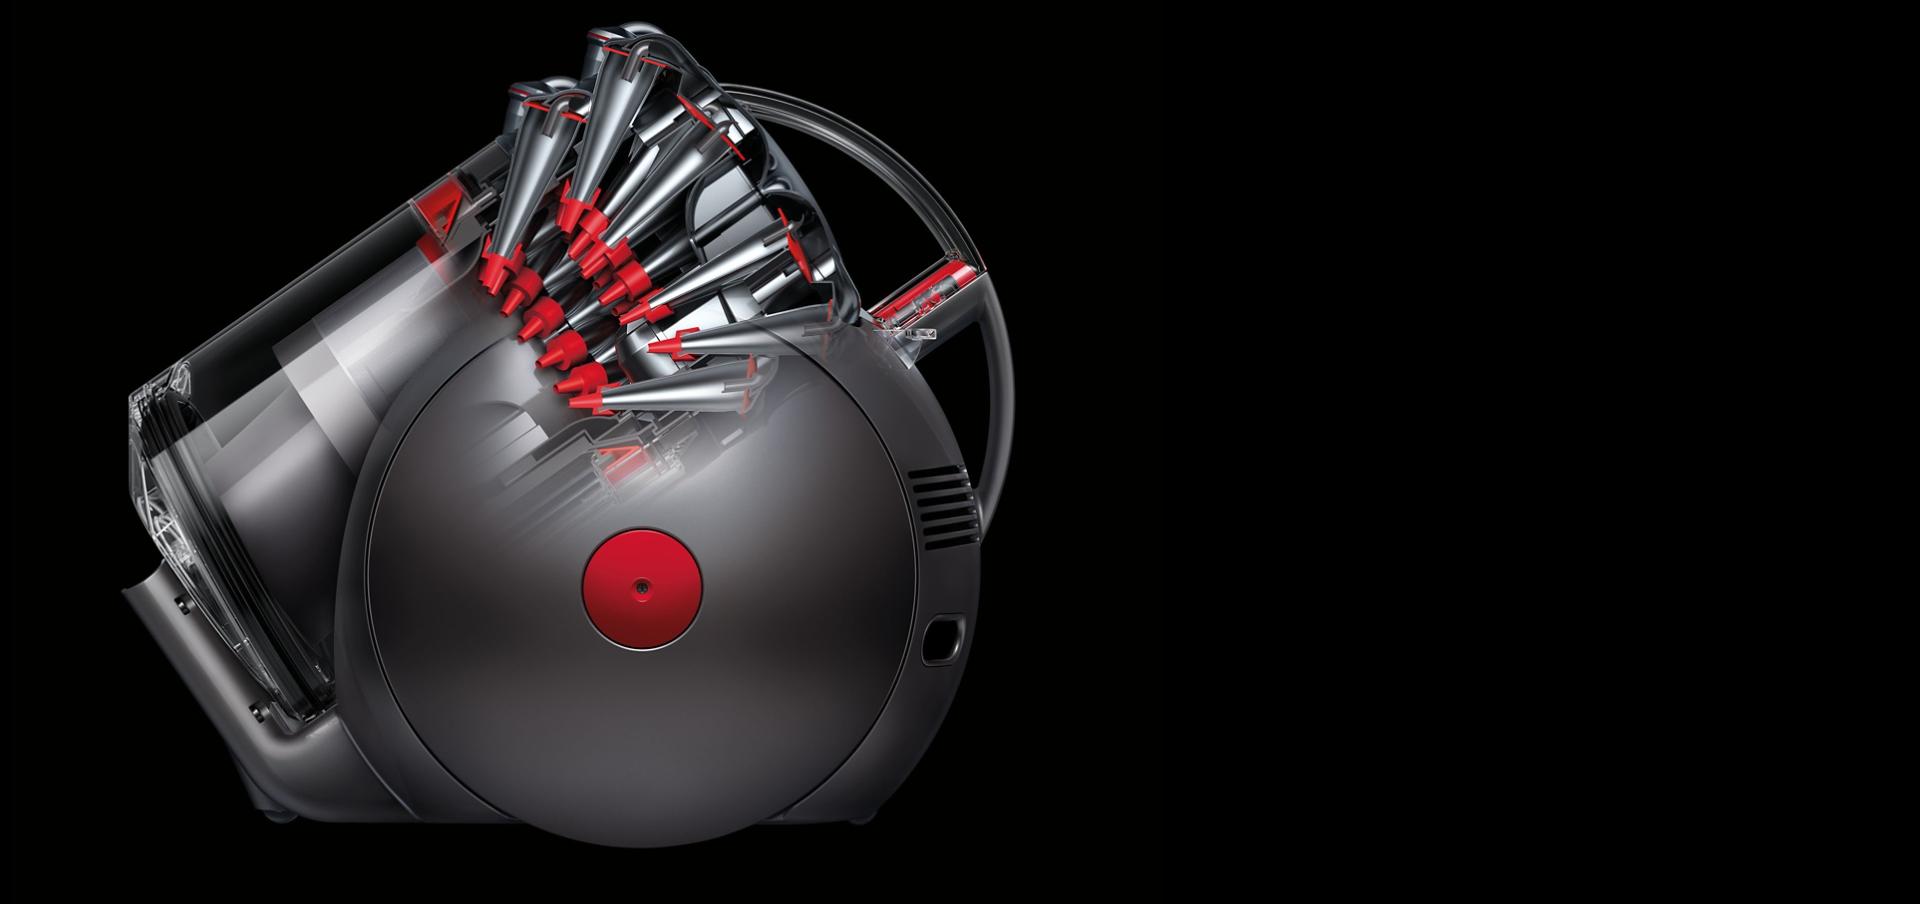 Dyson Cinetic tips highlighted in a Dyson Cinetic Big Ball machine 